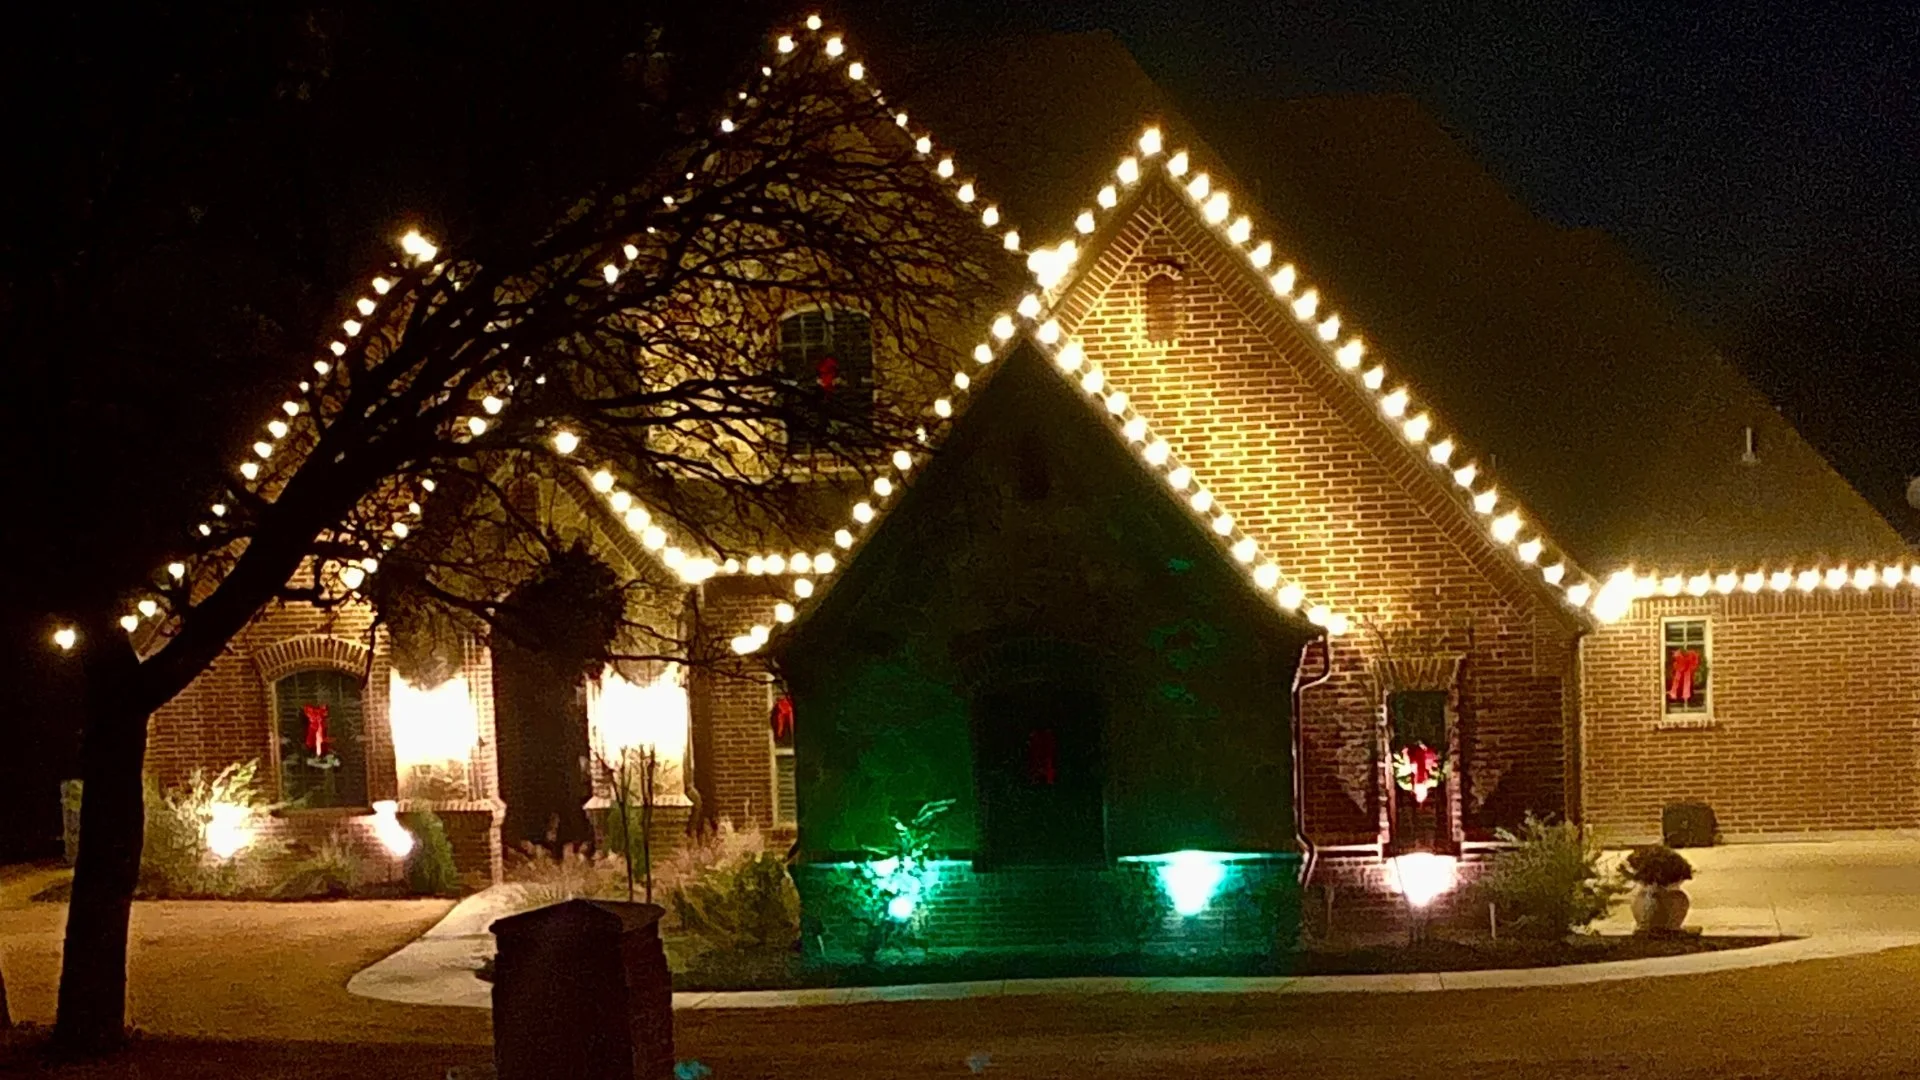 Green Flags to Look for When Hiring a Company to Install Your Holiday Lighting